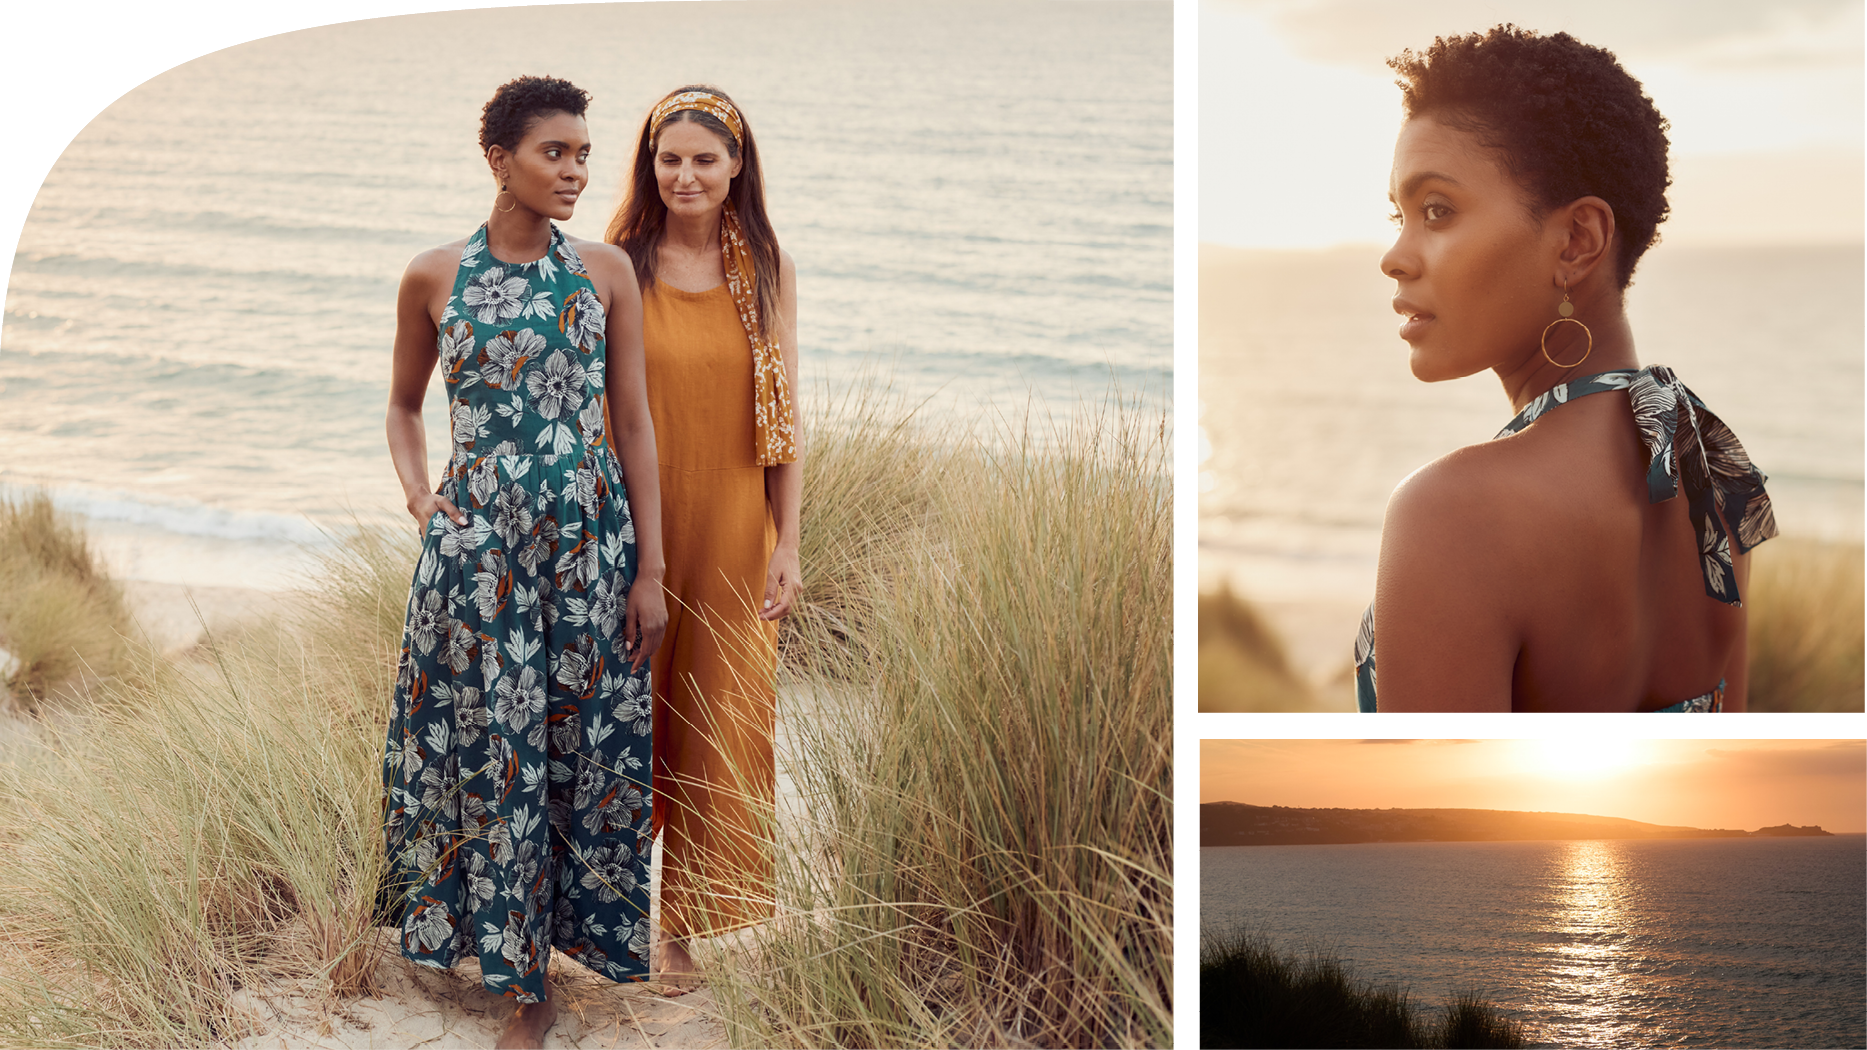 Models wear Seasalt Cornwall's new occasionwear dresses on a beach at sunset